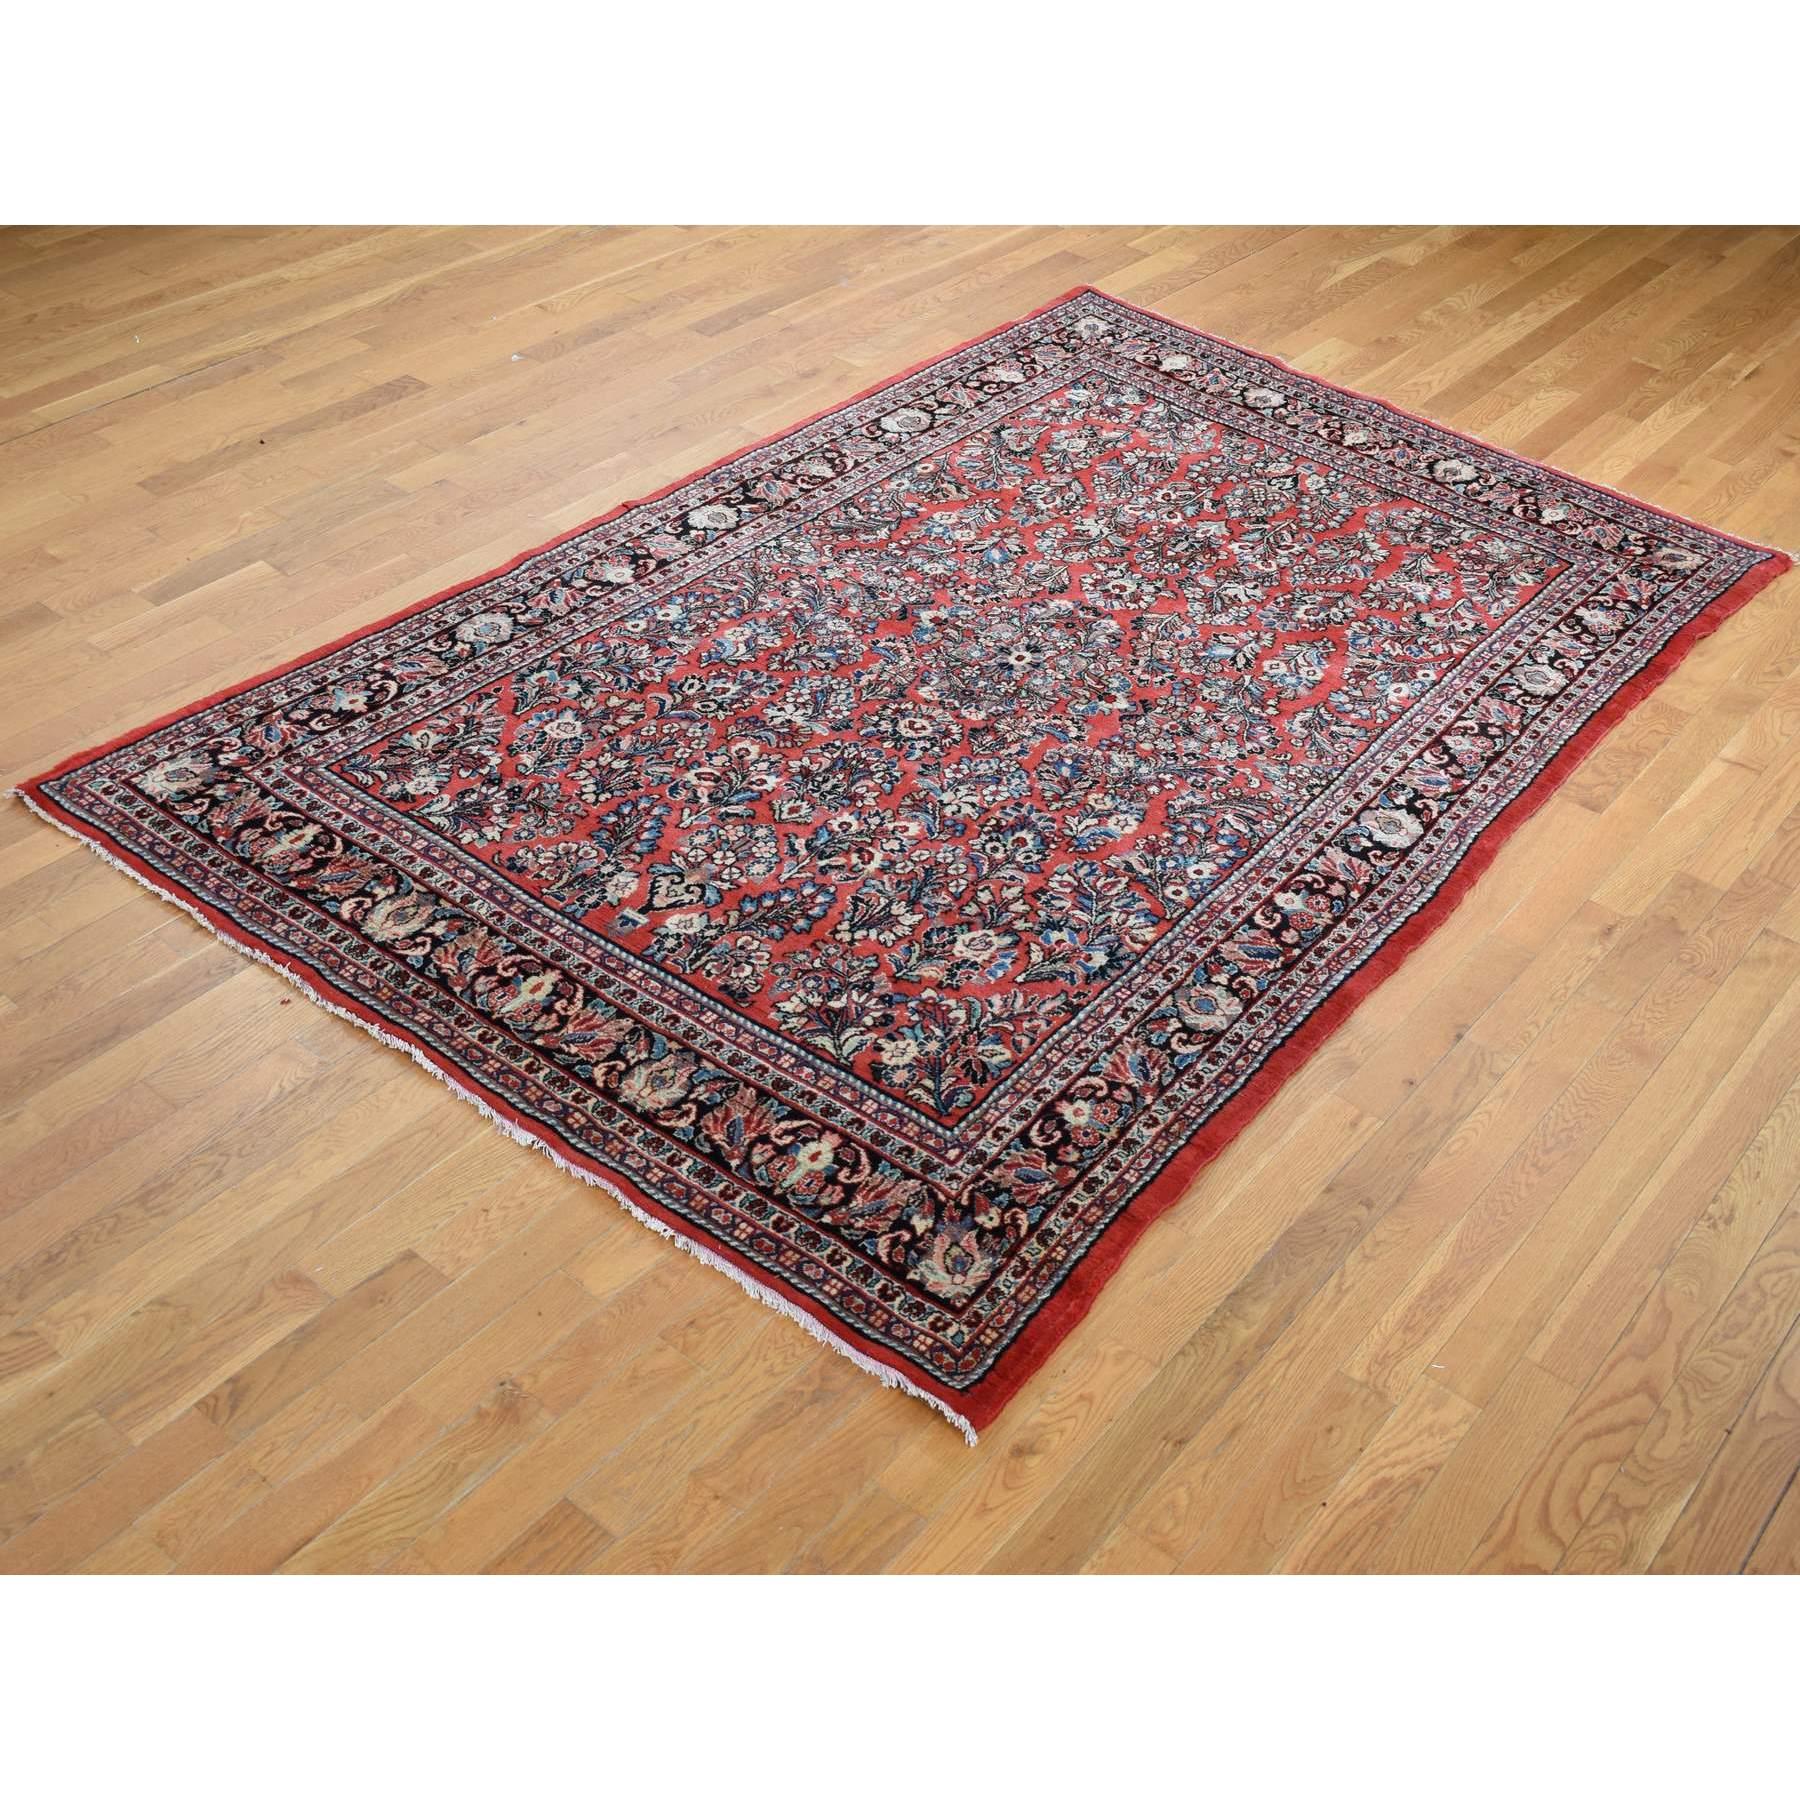 Medieval Red Wool Antique Persian Sarouk Hand Knotted Clean Soft Full and Thick Pile Rug For Sale